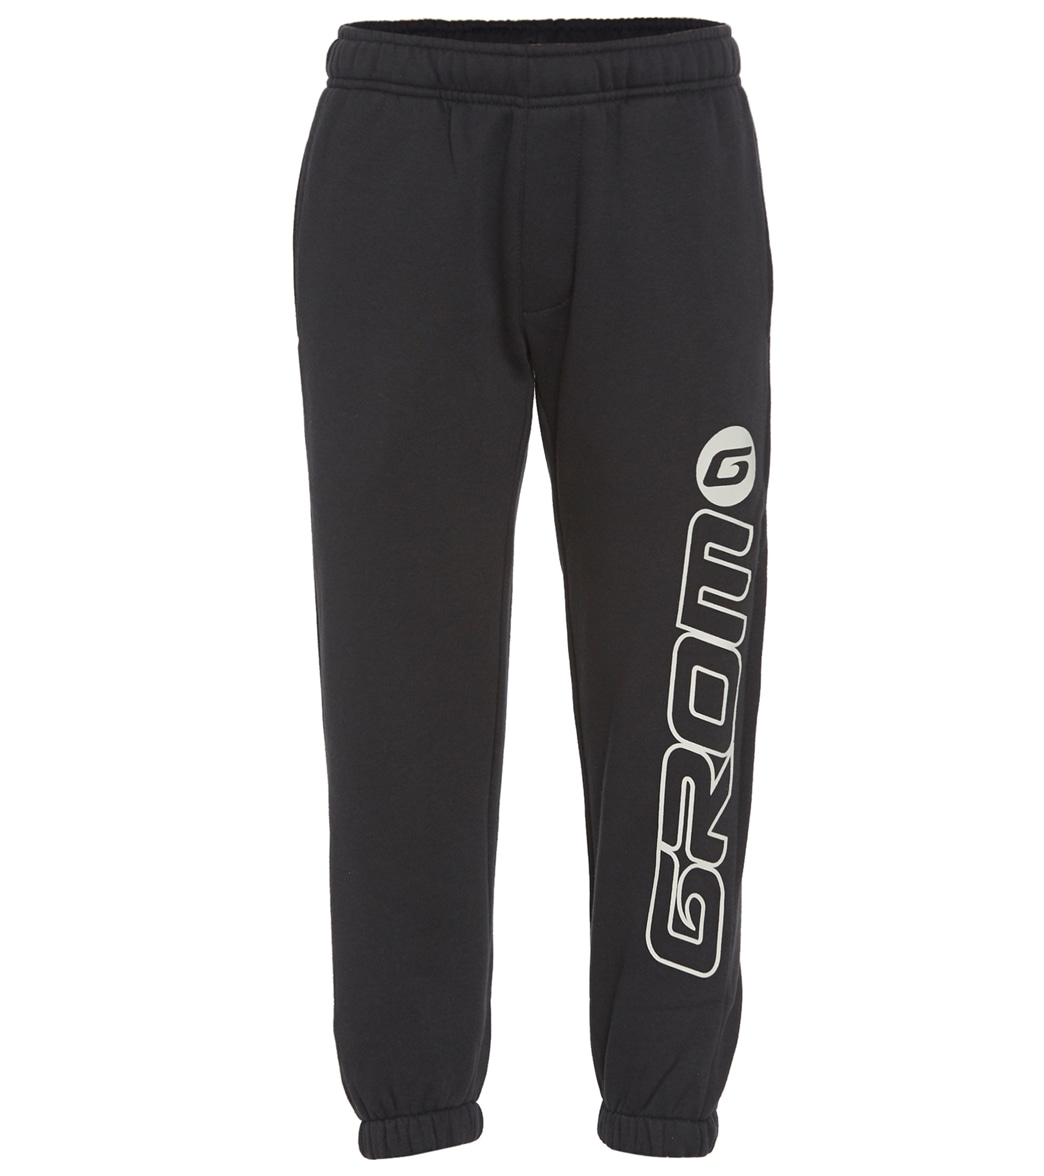 Grom Boys' Circle G Sweatpant - Navy Large Cotton/Polyester - Swimoutlet.com